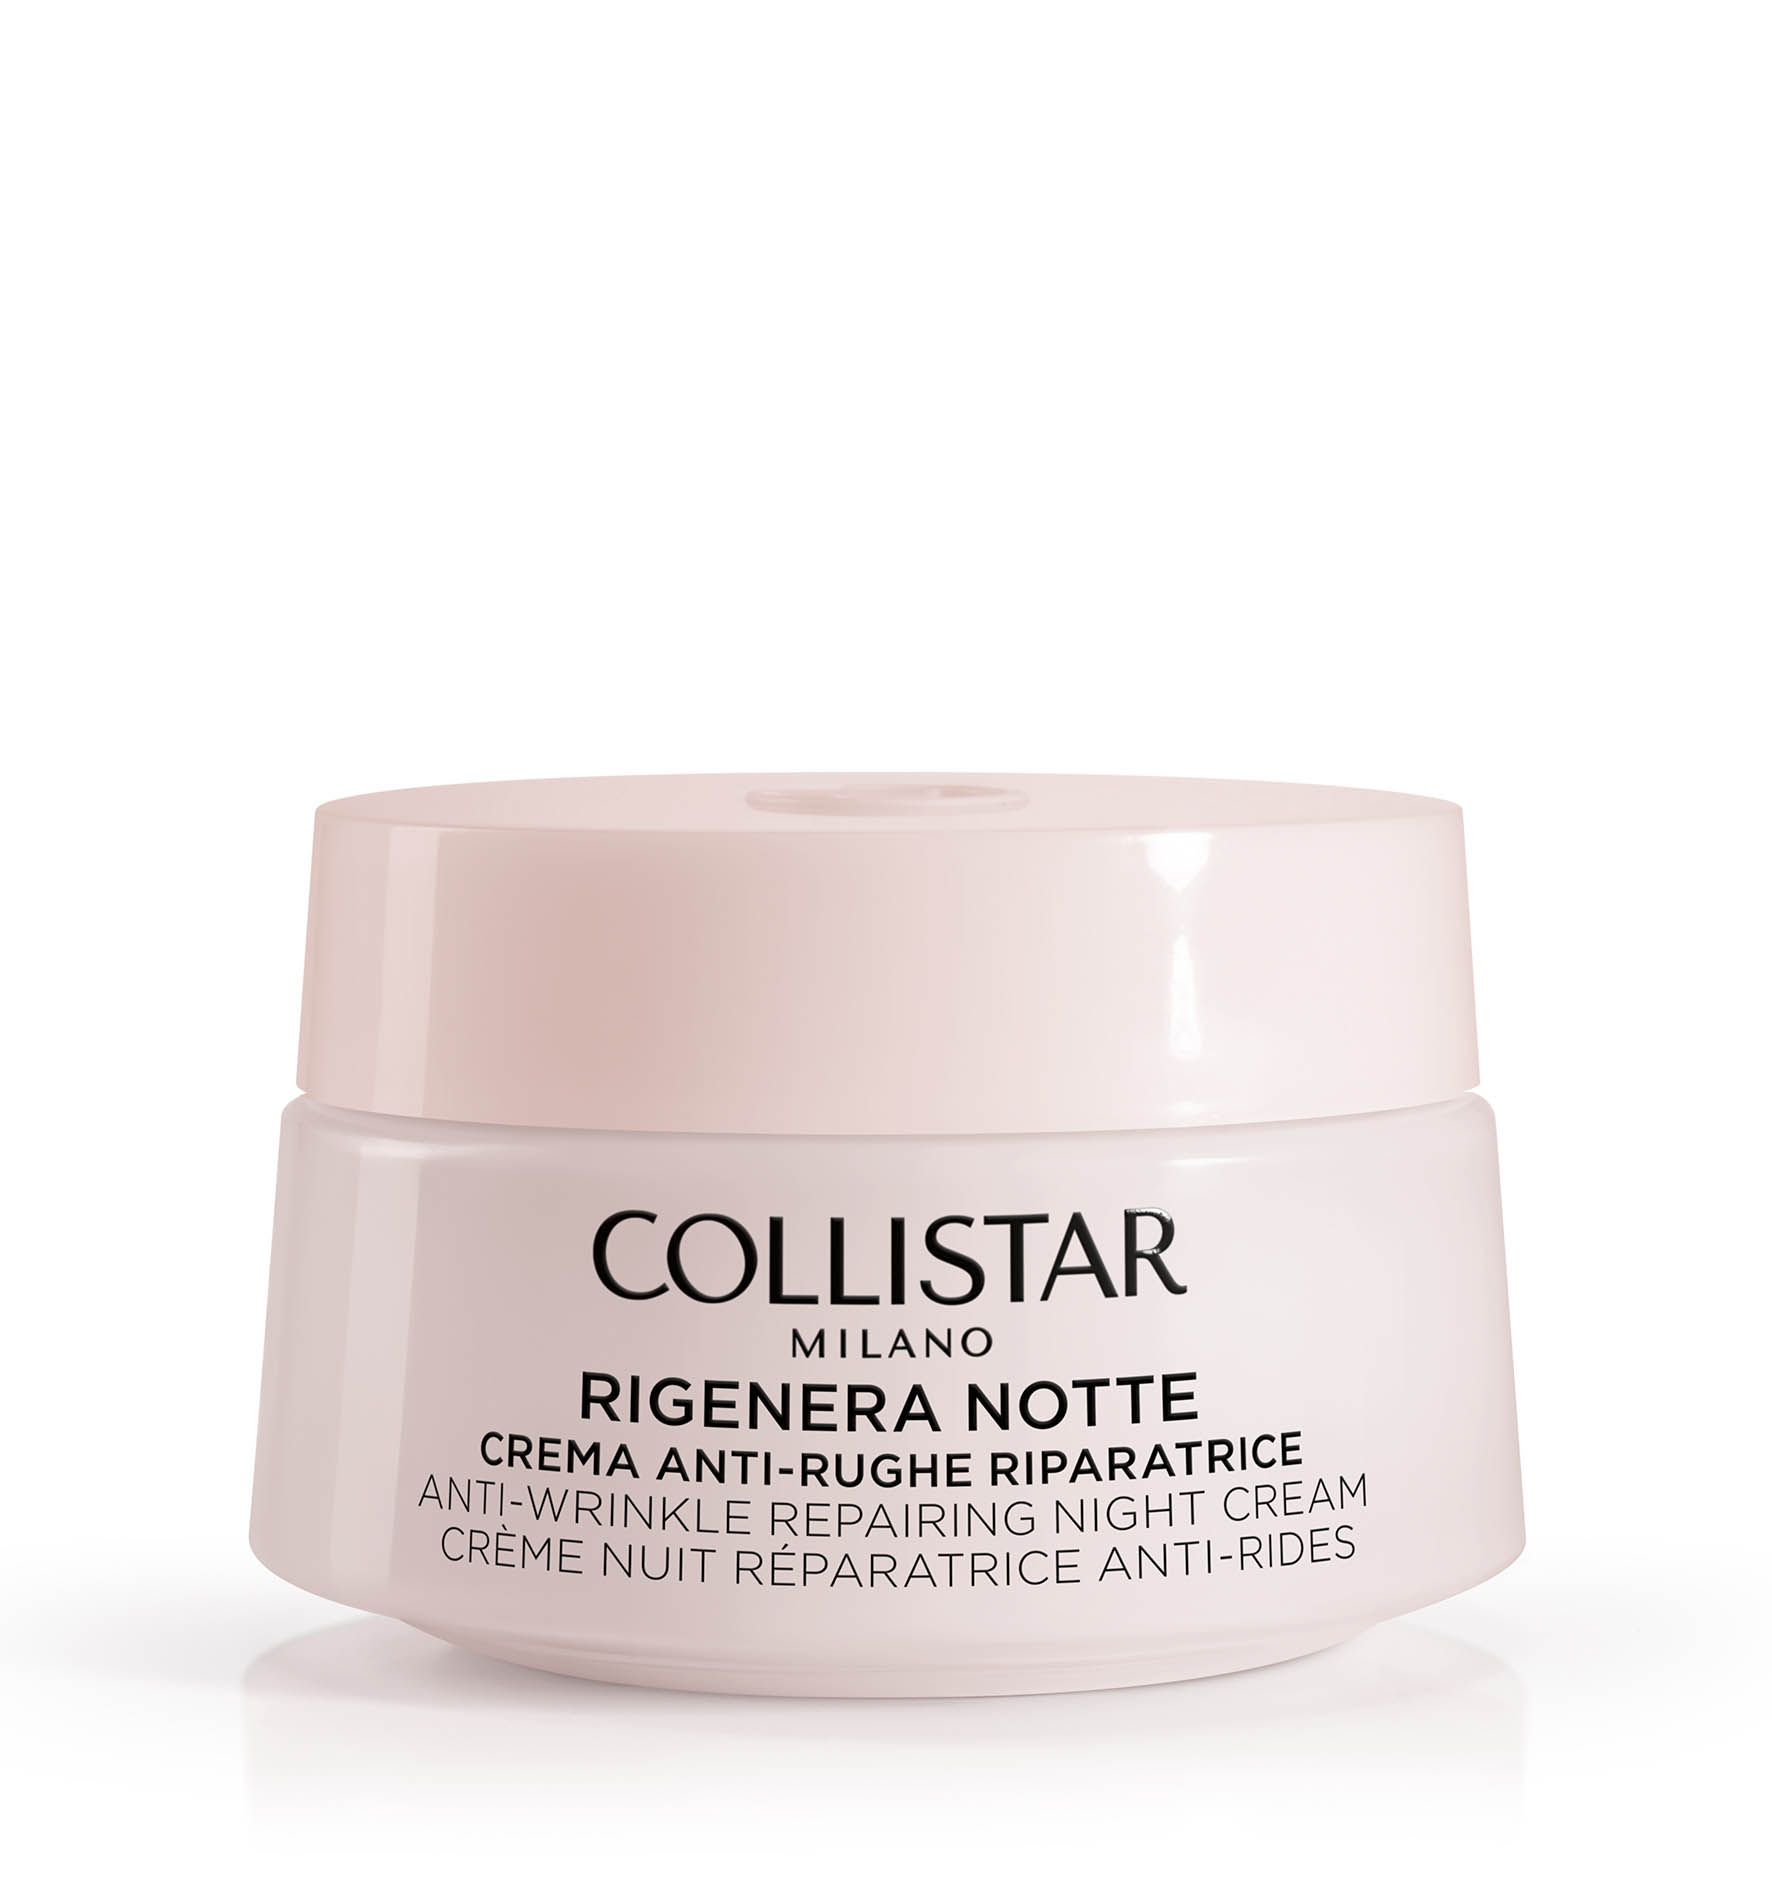 RIGENERA ANTI-WRINKLE REPAIRING FACE AND NECK NIGHT CREAM - Loss of tone and compactness | Collistar - Shop Online Ufficiale